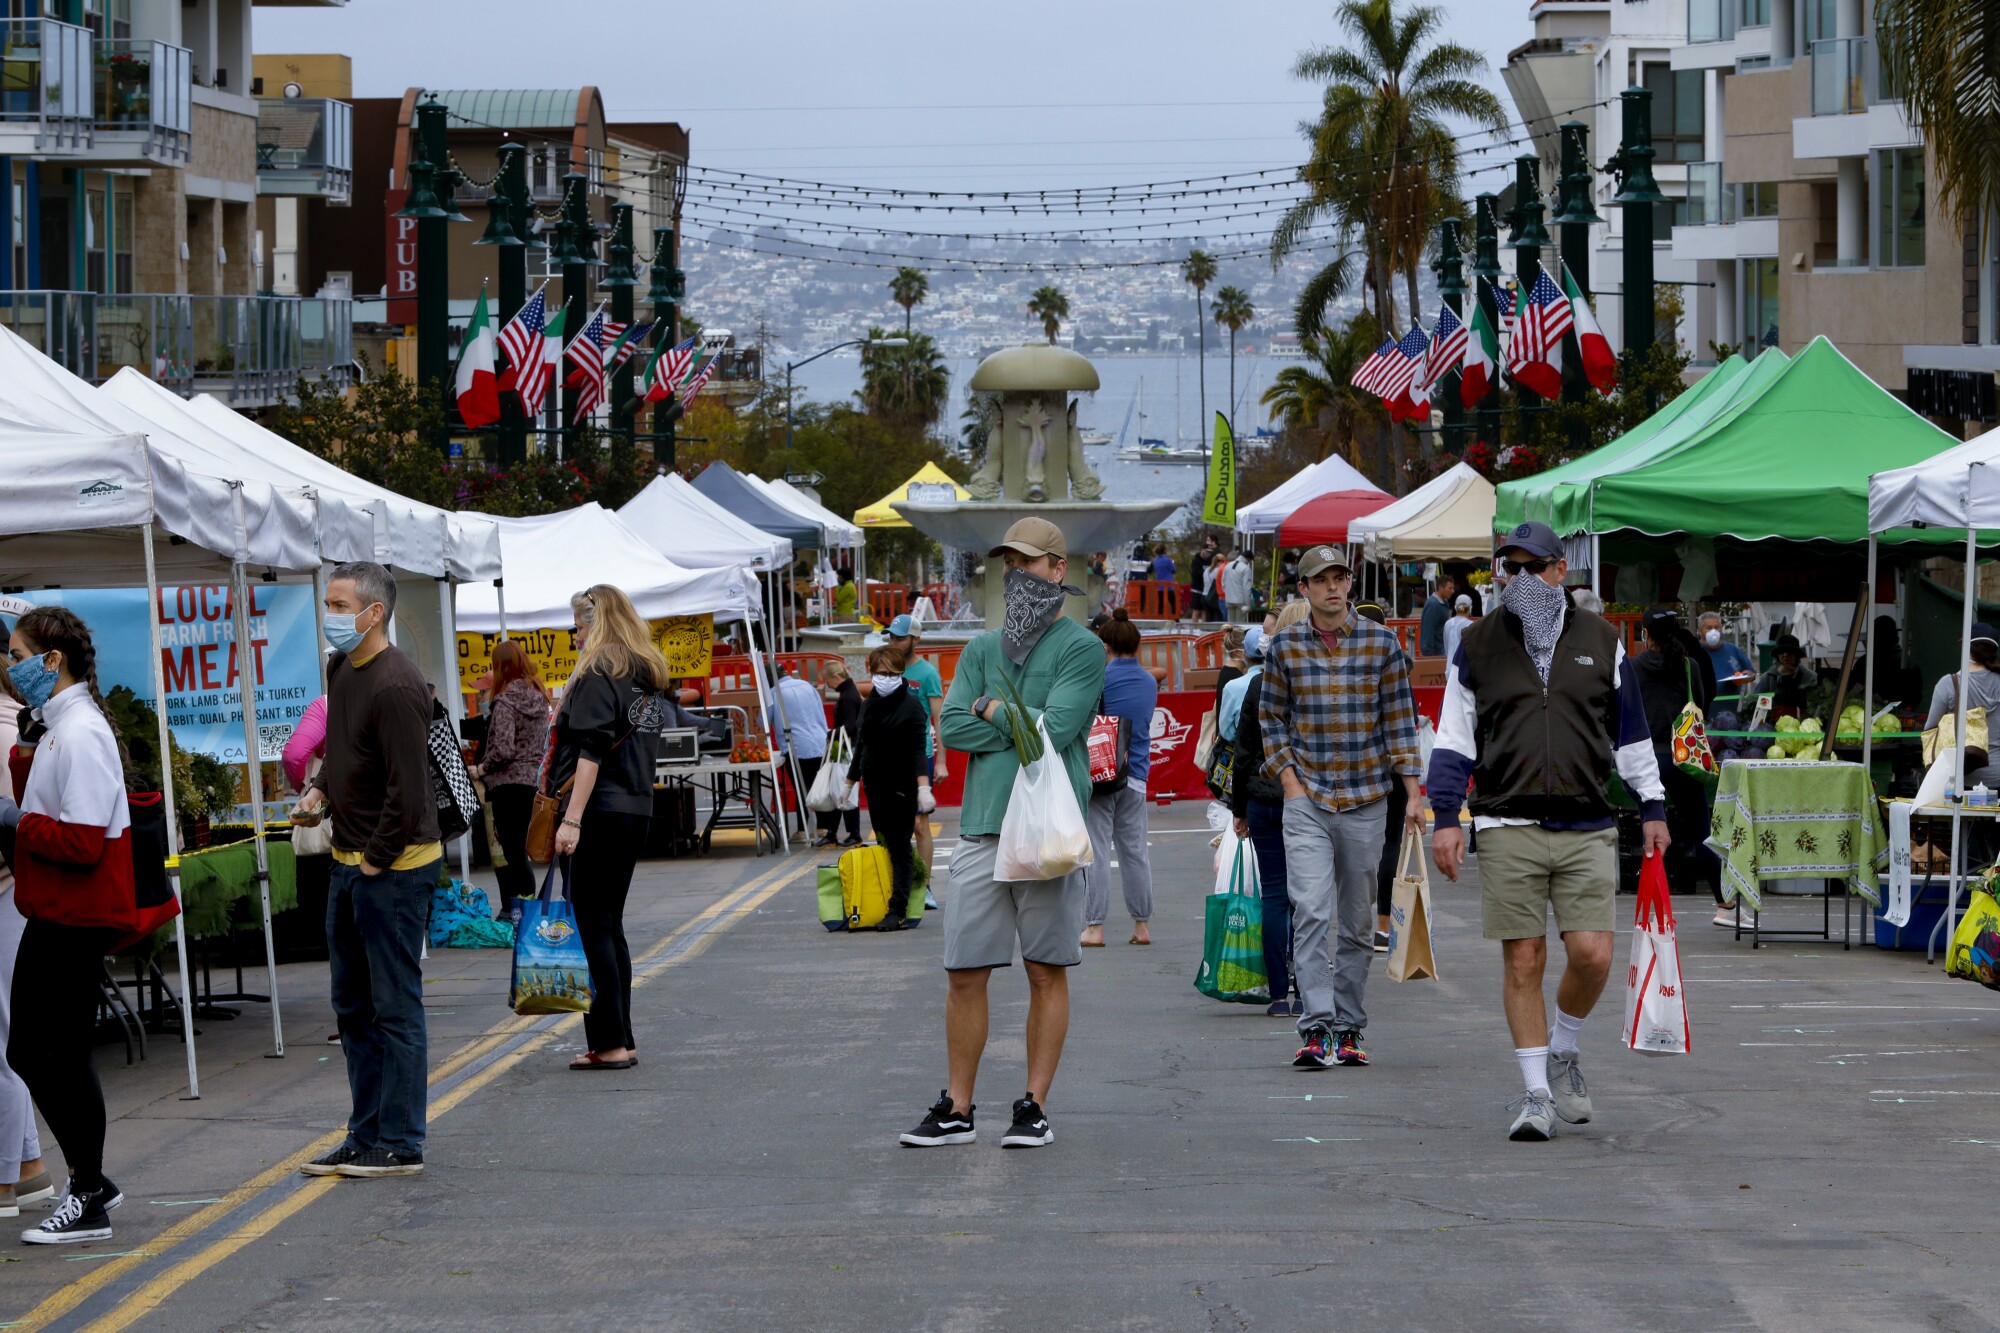 Customers were limited to 50 at a time to enter the Farmers Market in Little Italy on Saturday, April 4, 2020.